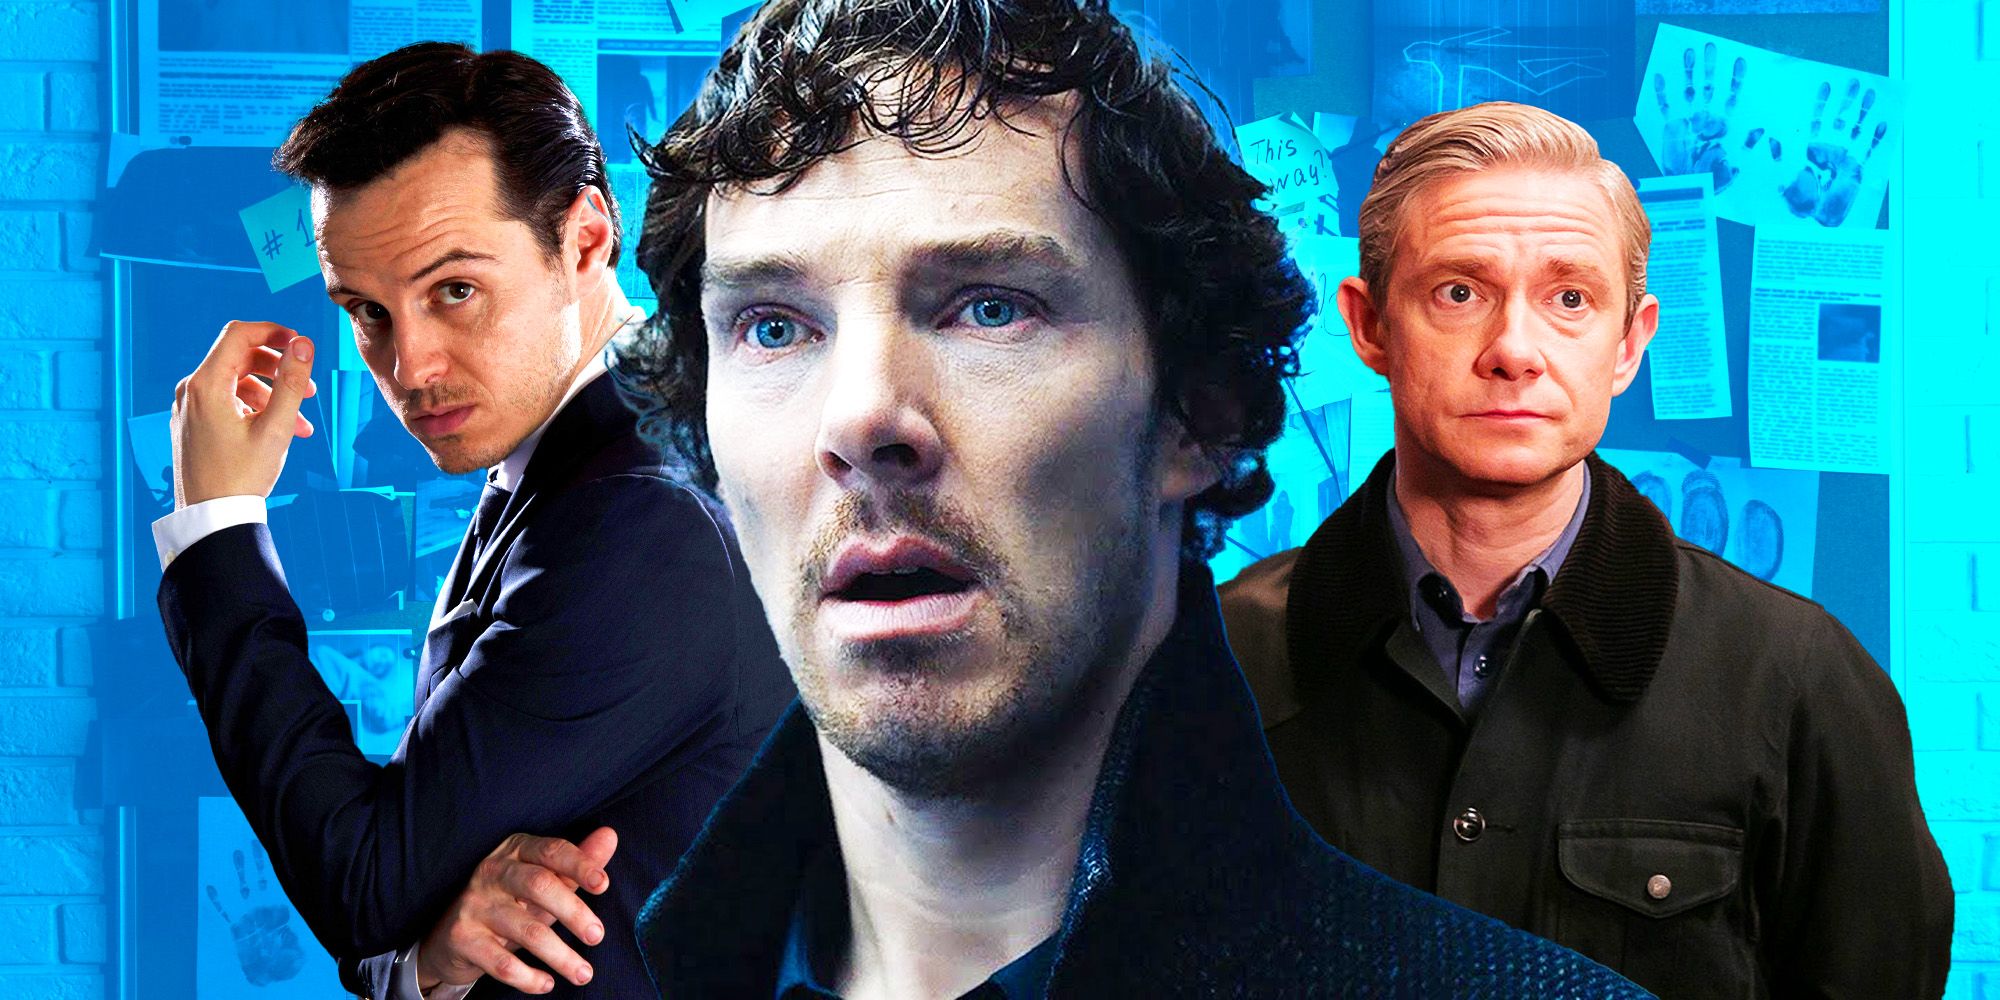 Sherlock collage with Moriarty (Andrew Scott), Sherlock Holmes (Benedict Cumberbatch) and James Watson (Martin Freeman) in front of a blue background